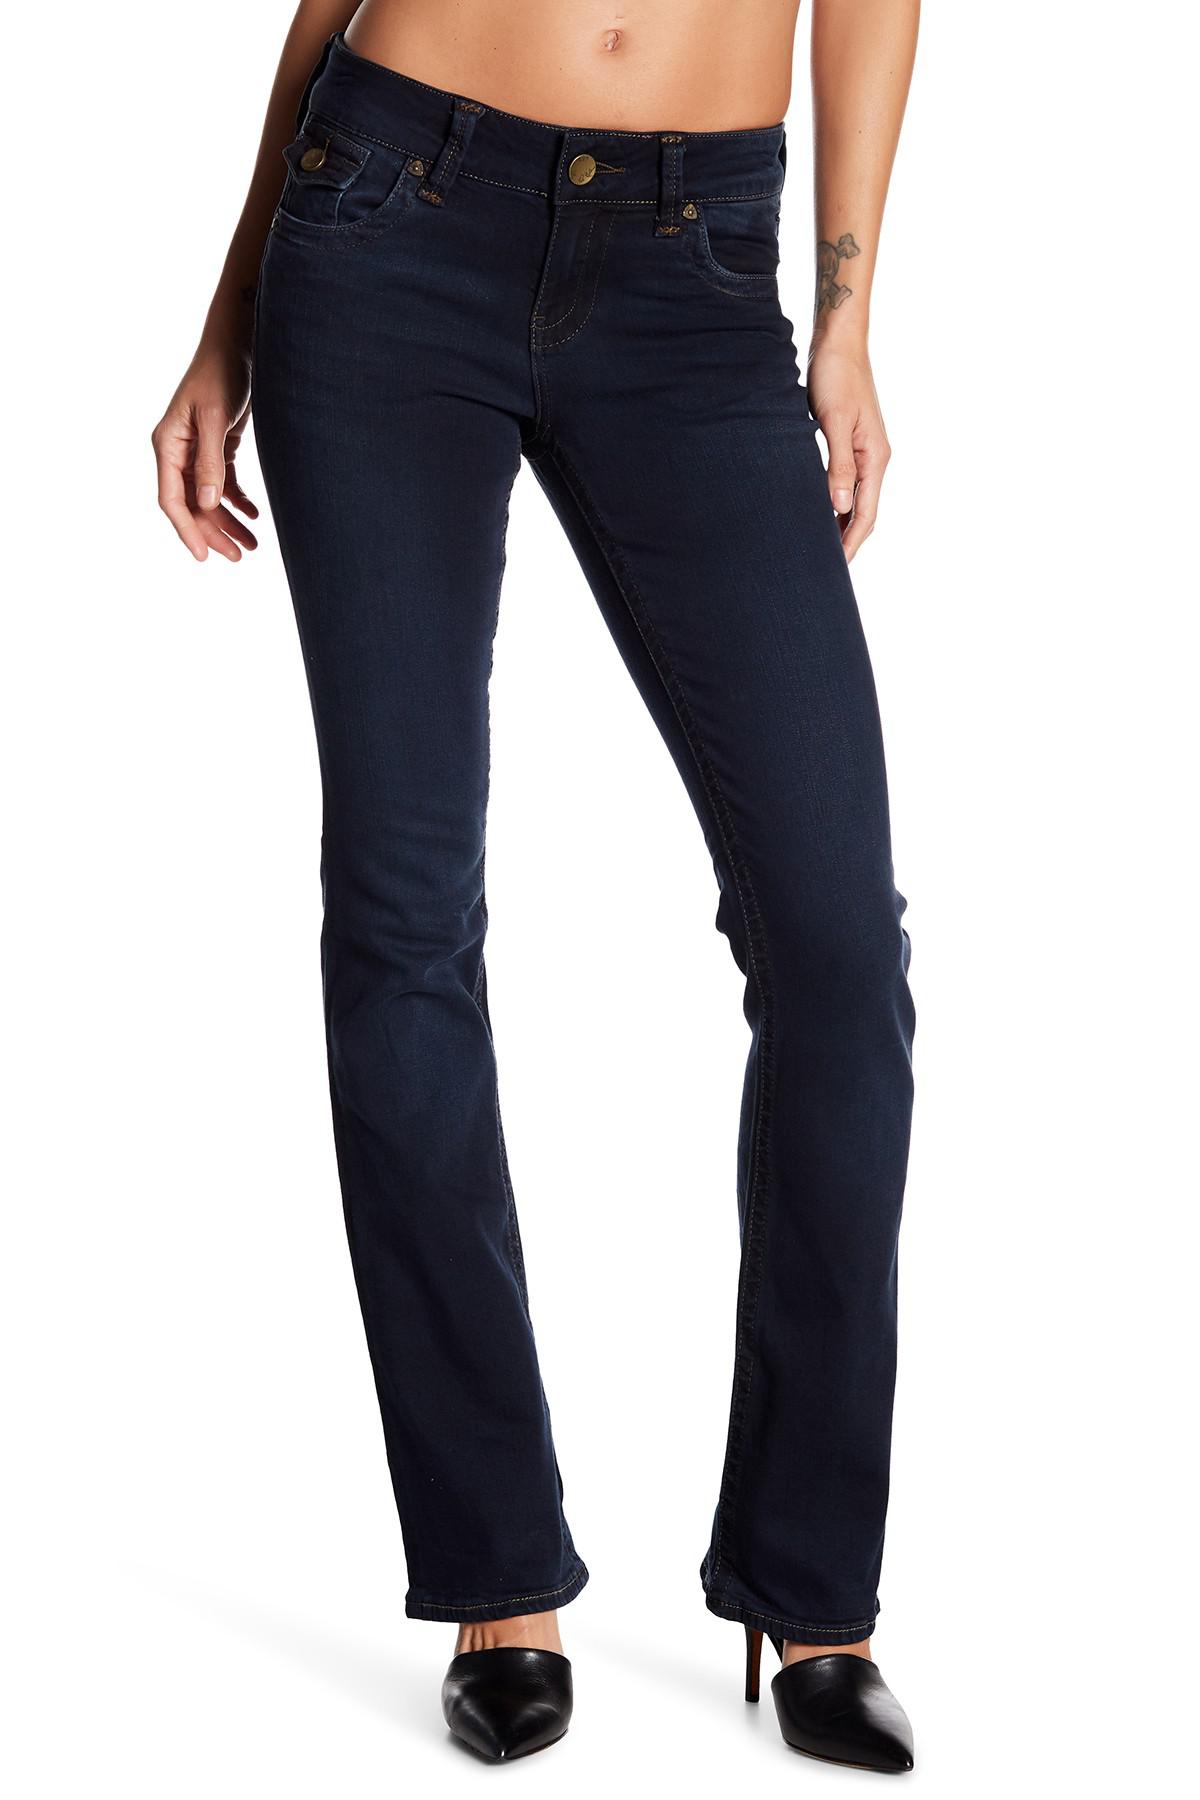 Lyst - Kut From The Kloth Natalie High Rise Bootcut Jeans in Blue